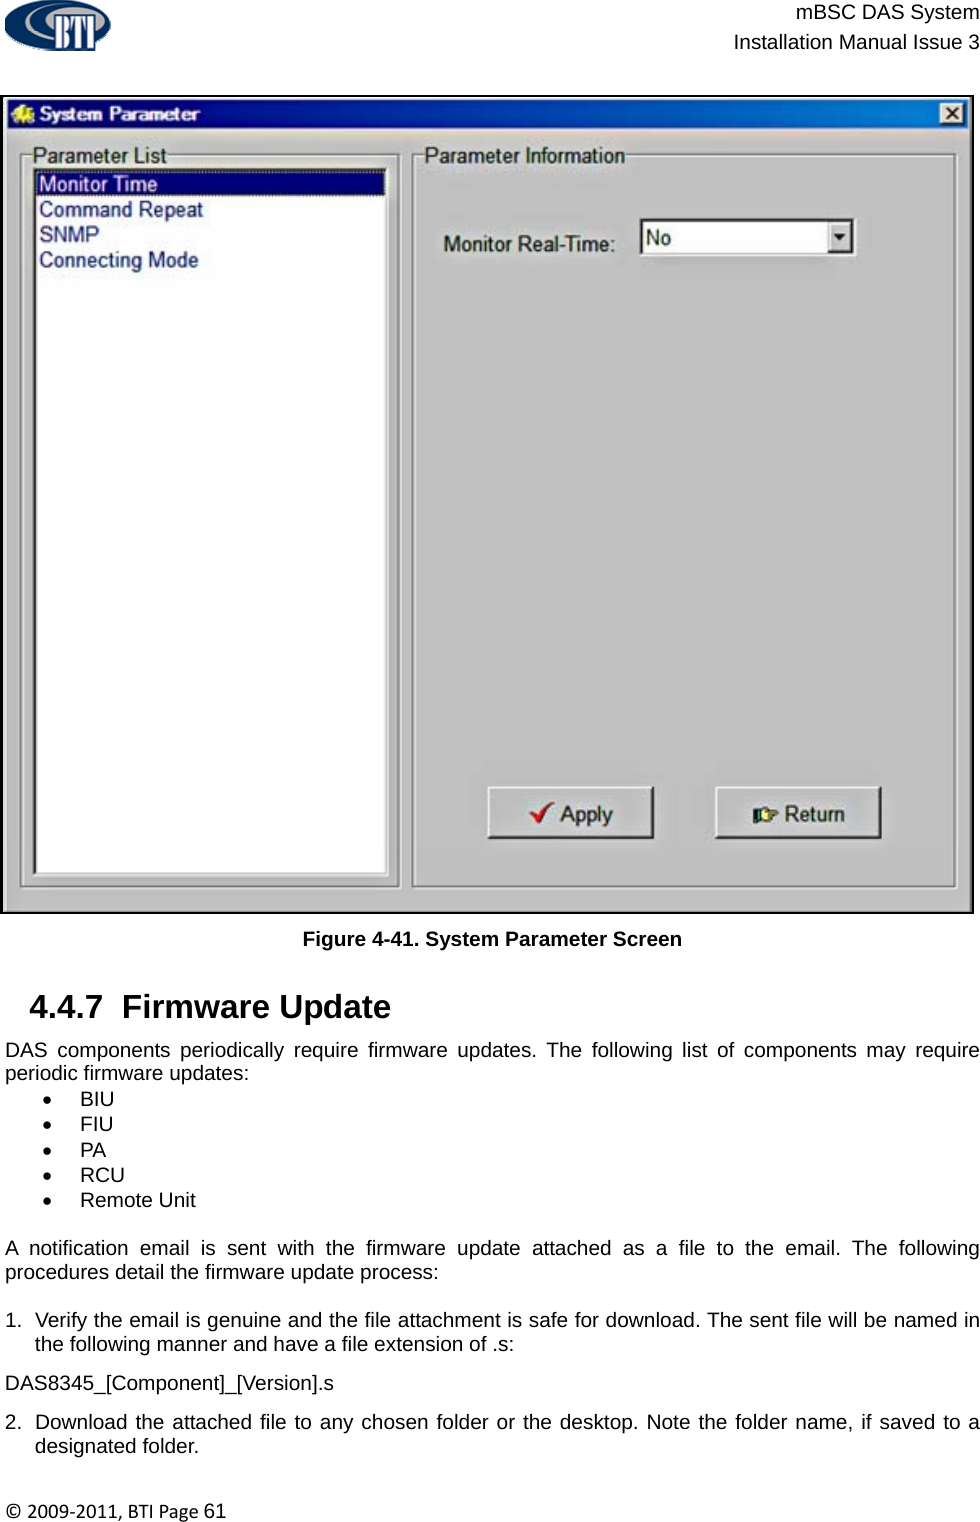                          mBSC DAS System  Installation Manual Issue 3  ©2009‐2011,BTIPage61  Figure 4-41. System Parameter Screen   4.4.7  Firmware Update  DAS components periodically require firmware updates. The following list of components may require periodic firmware updates: • BIU • FIU • PA • RCU • Remote Unit   A notification email is sent with the firmware update attached as a file to the email. The following procedures detail the firmware update process:  1.  Verify the email is genuine and the file attachment is safe for download. The sent file will be named in the following manner and have a file extension of .s: DAS8345_[Component]_[Version].s 2.  Download the attached file to any chosen folder or the desktop. Note the folder name, if saved to a designated folder. 